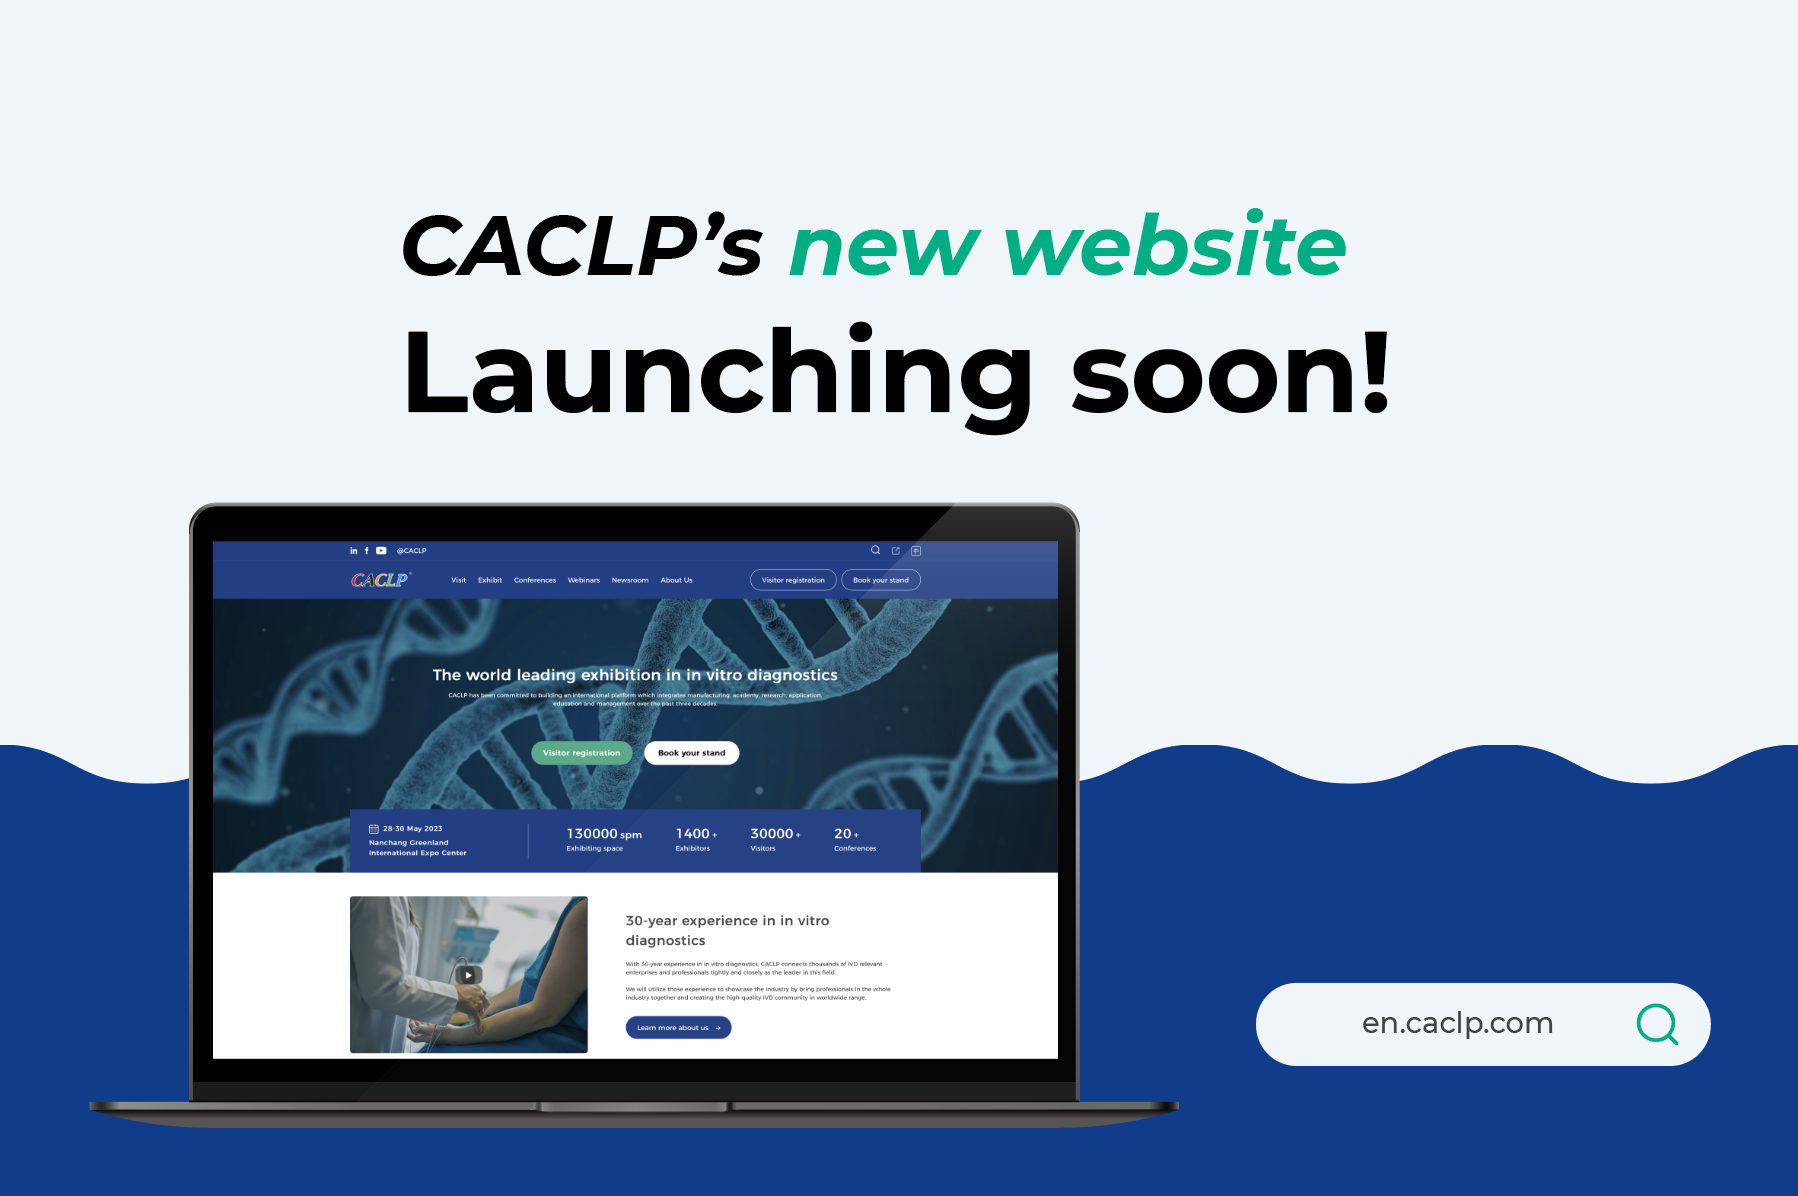 CACLP's new website is launching!